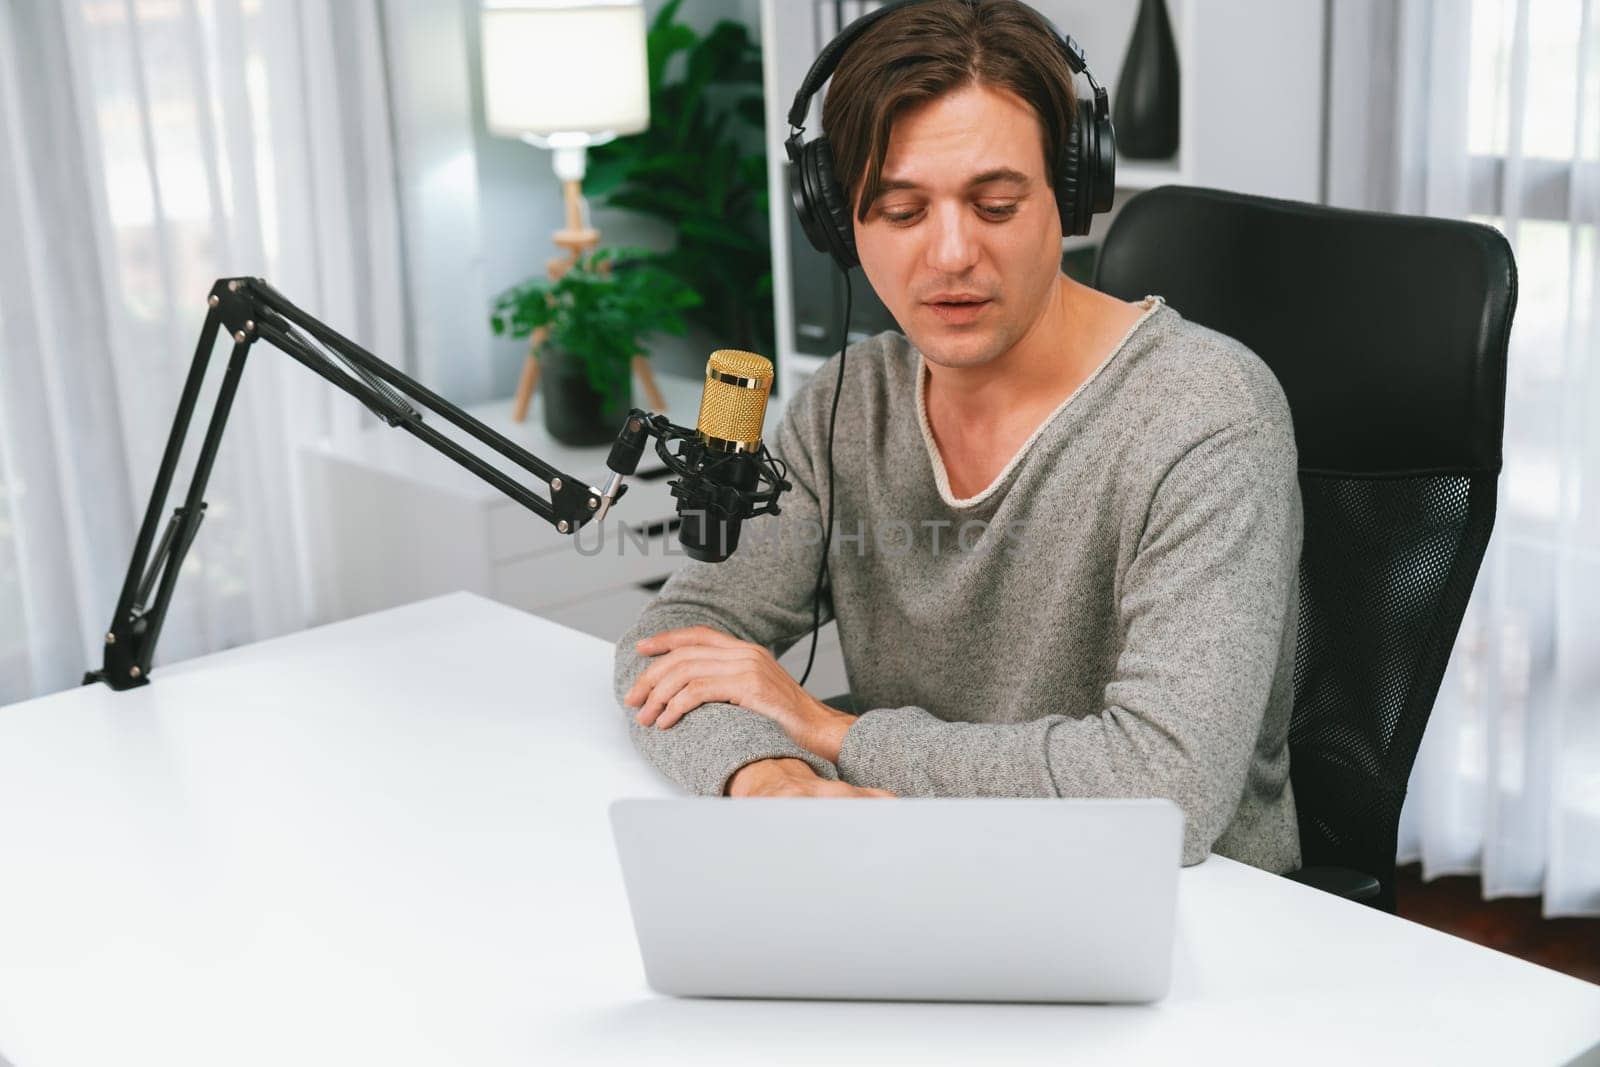 Host channel in smiling smart broadcaster recording, talking show with script and smartphone on desk on live social media, wearing headphones to record video streamer at modern home studio. Pecuniary.